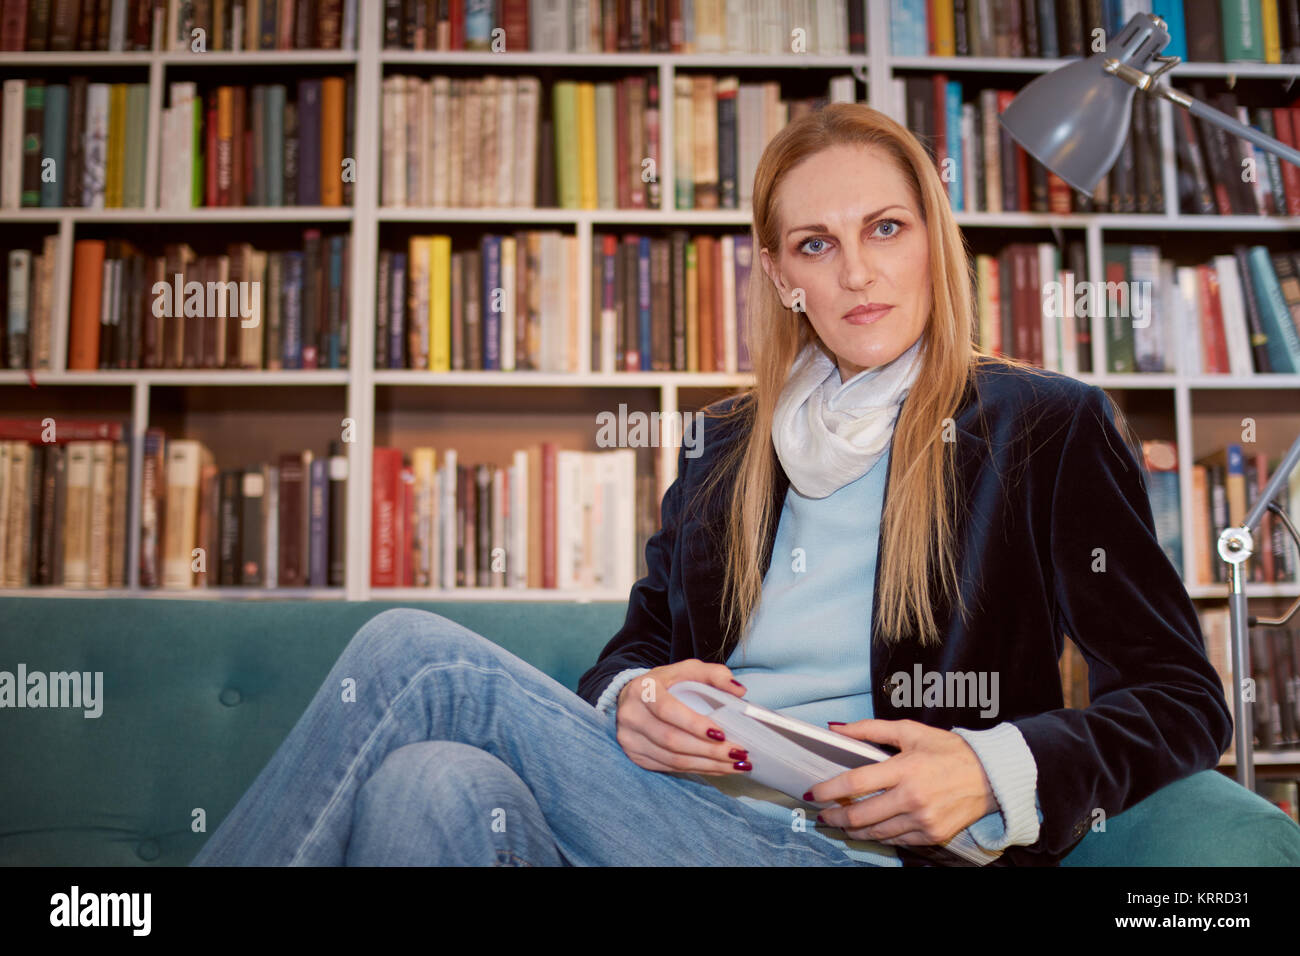 one woman, posing, looking at camera, holding magazine. shelf full of books behind (out of focus). Stock Photo